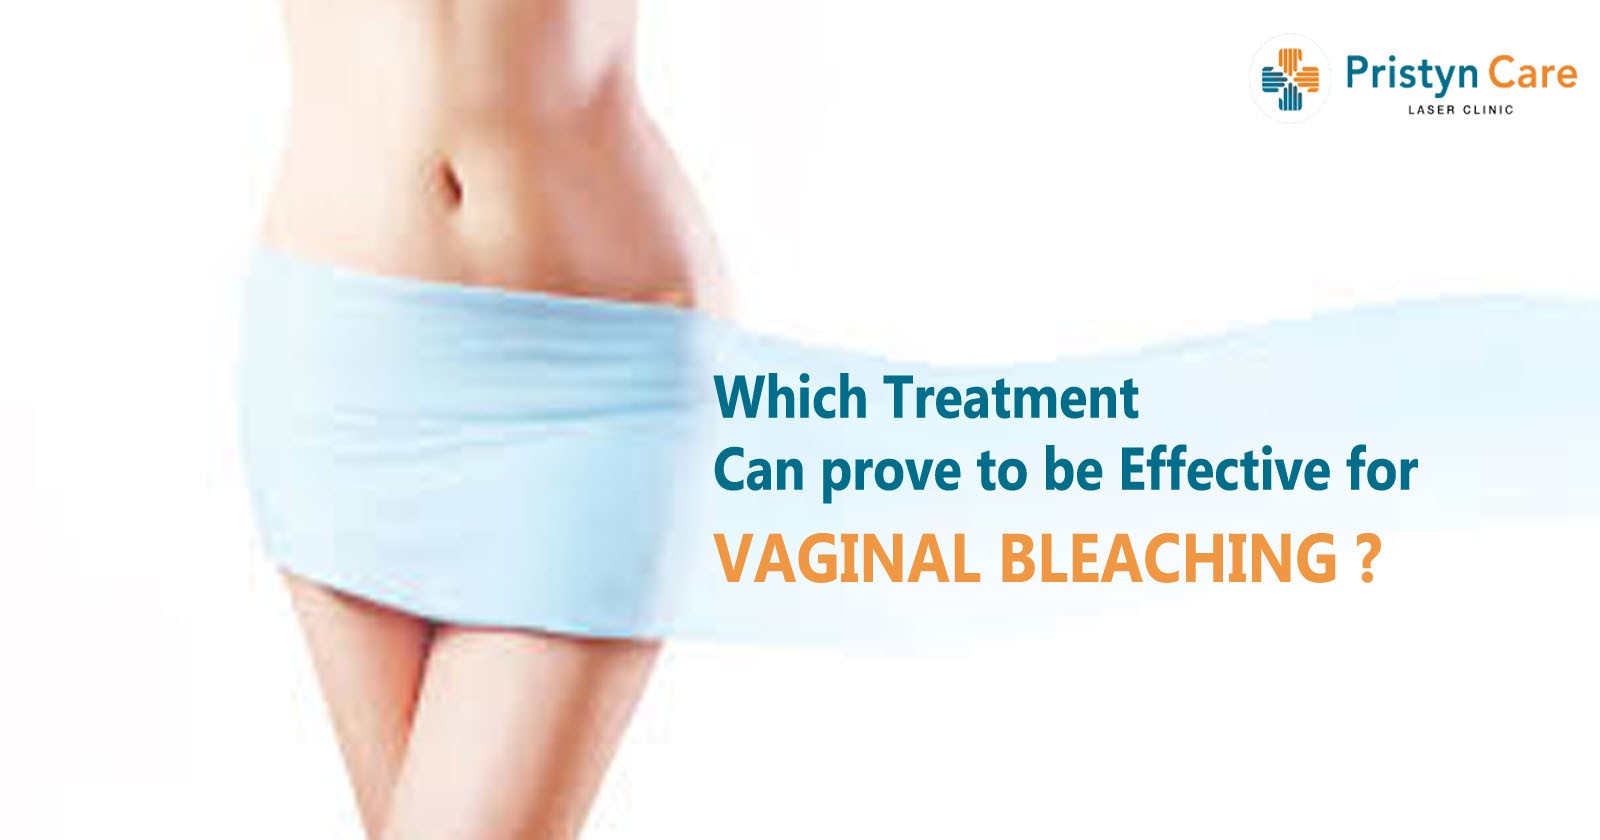 which-treatment-can-prove-to-be-effective-for-vaginal-bleaching